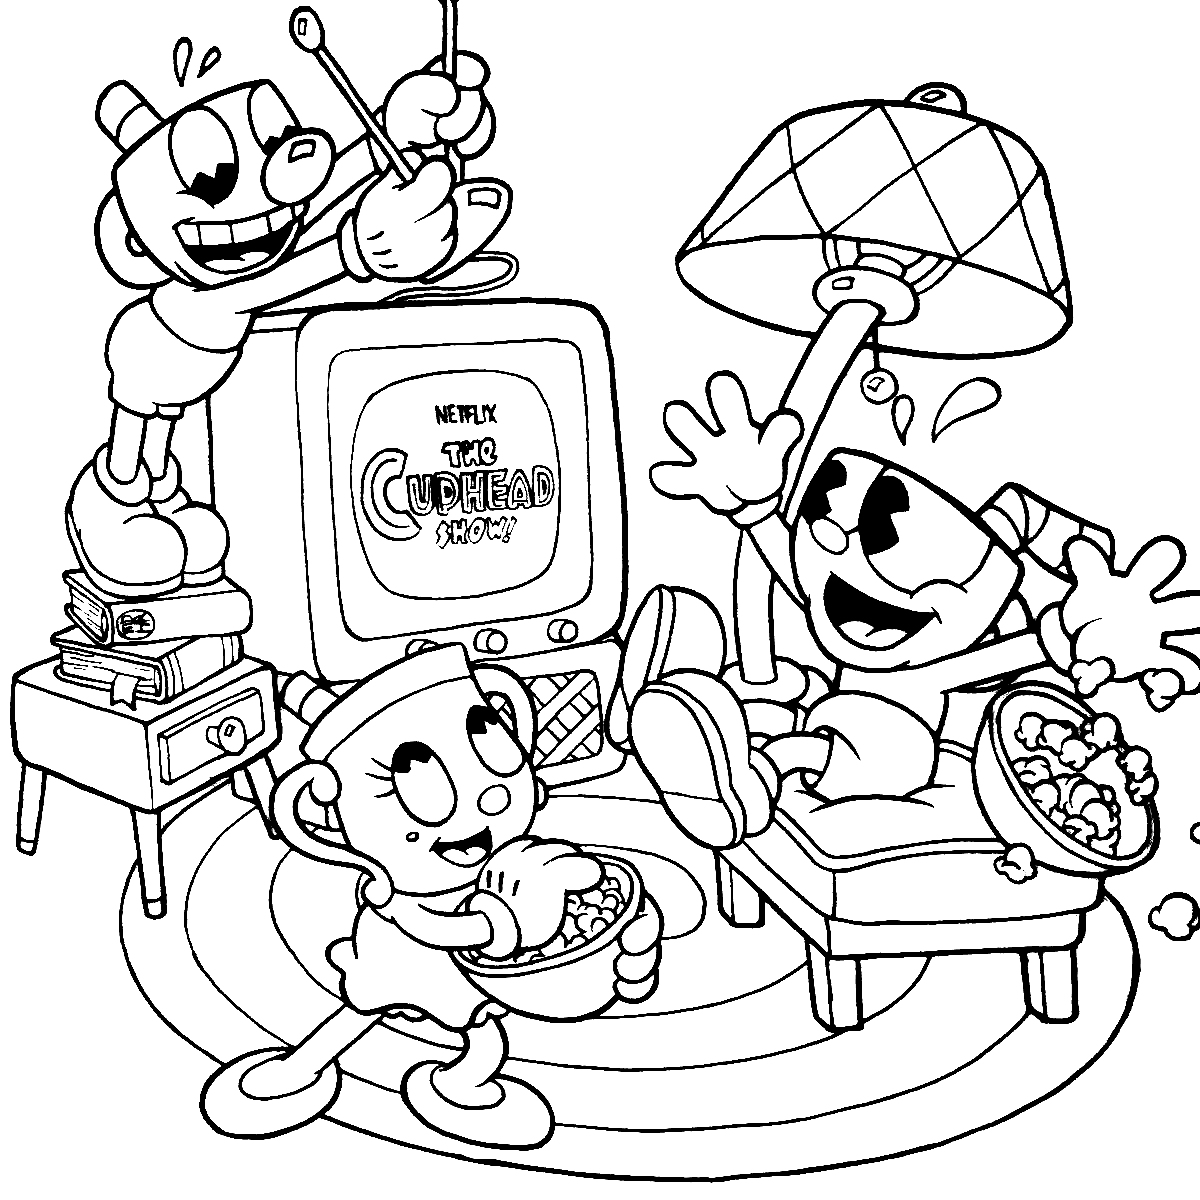 Cuphead And Friends